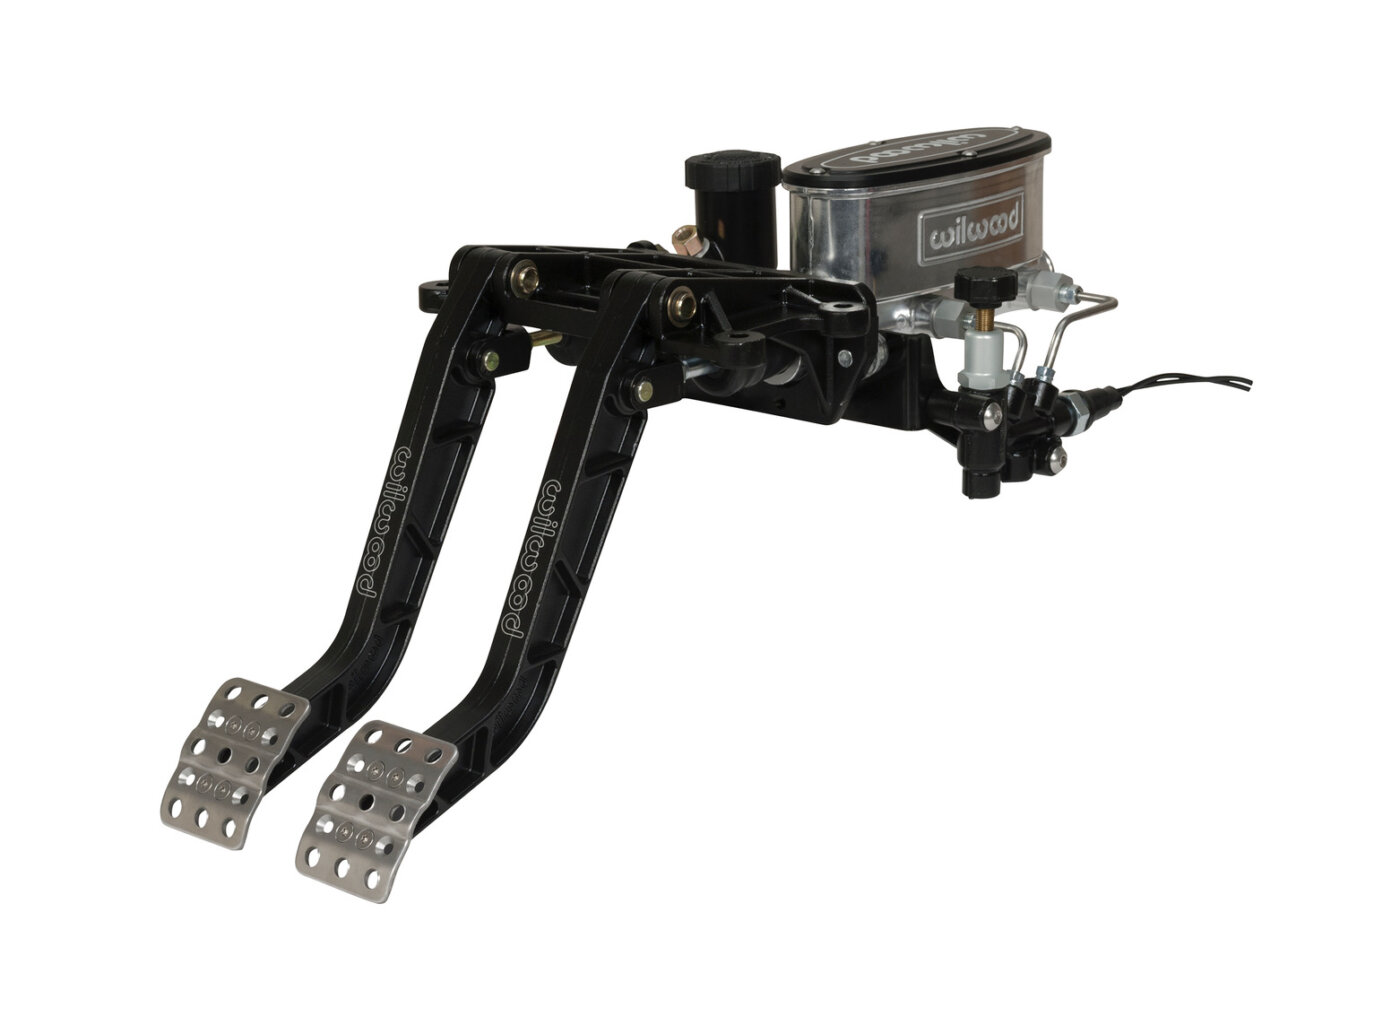 						Wilwood Brake And Clutch Pedal2
			